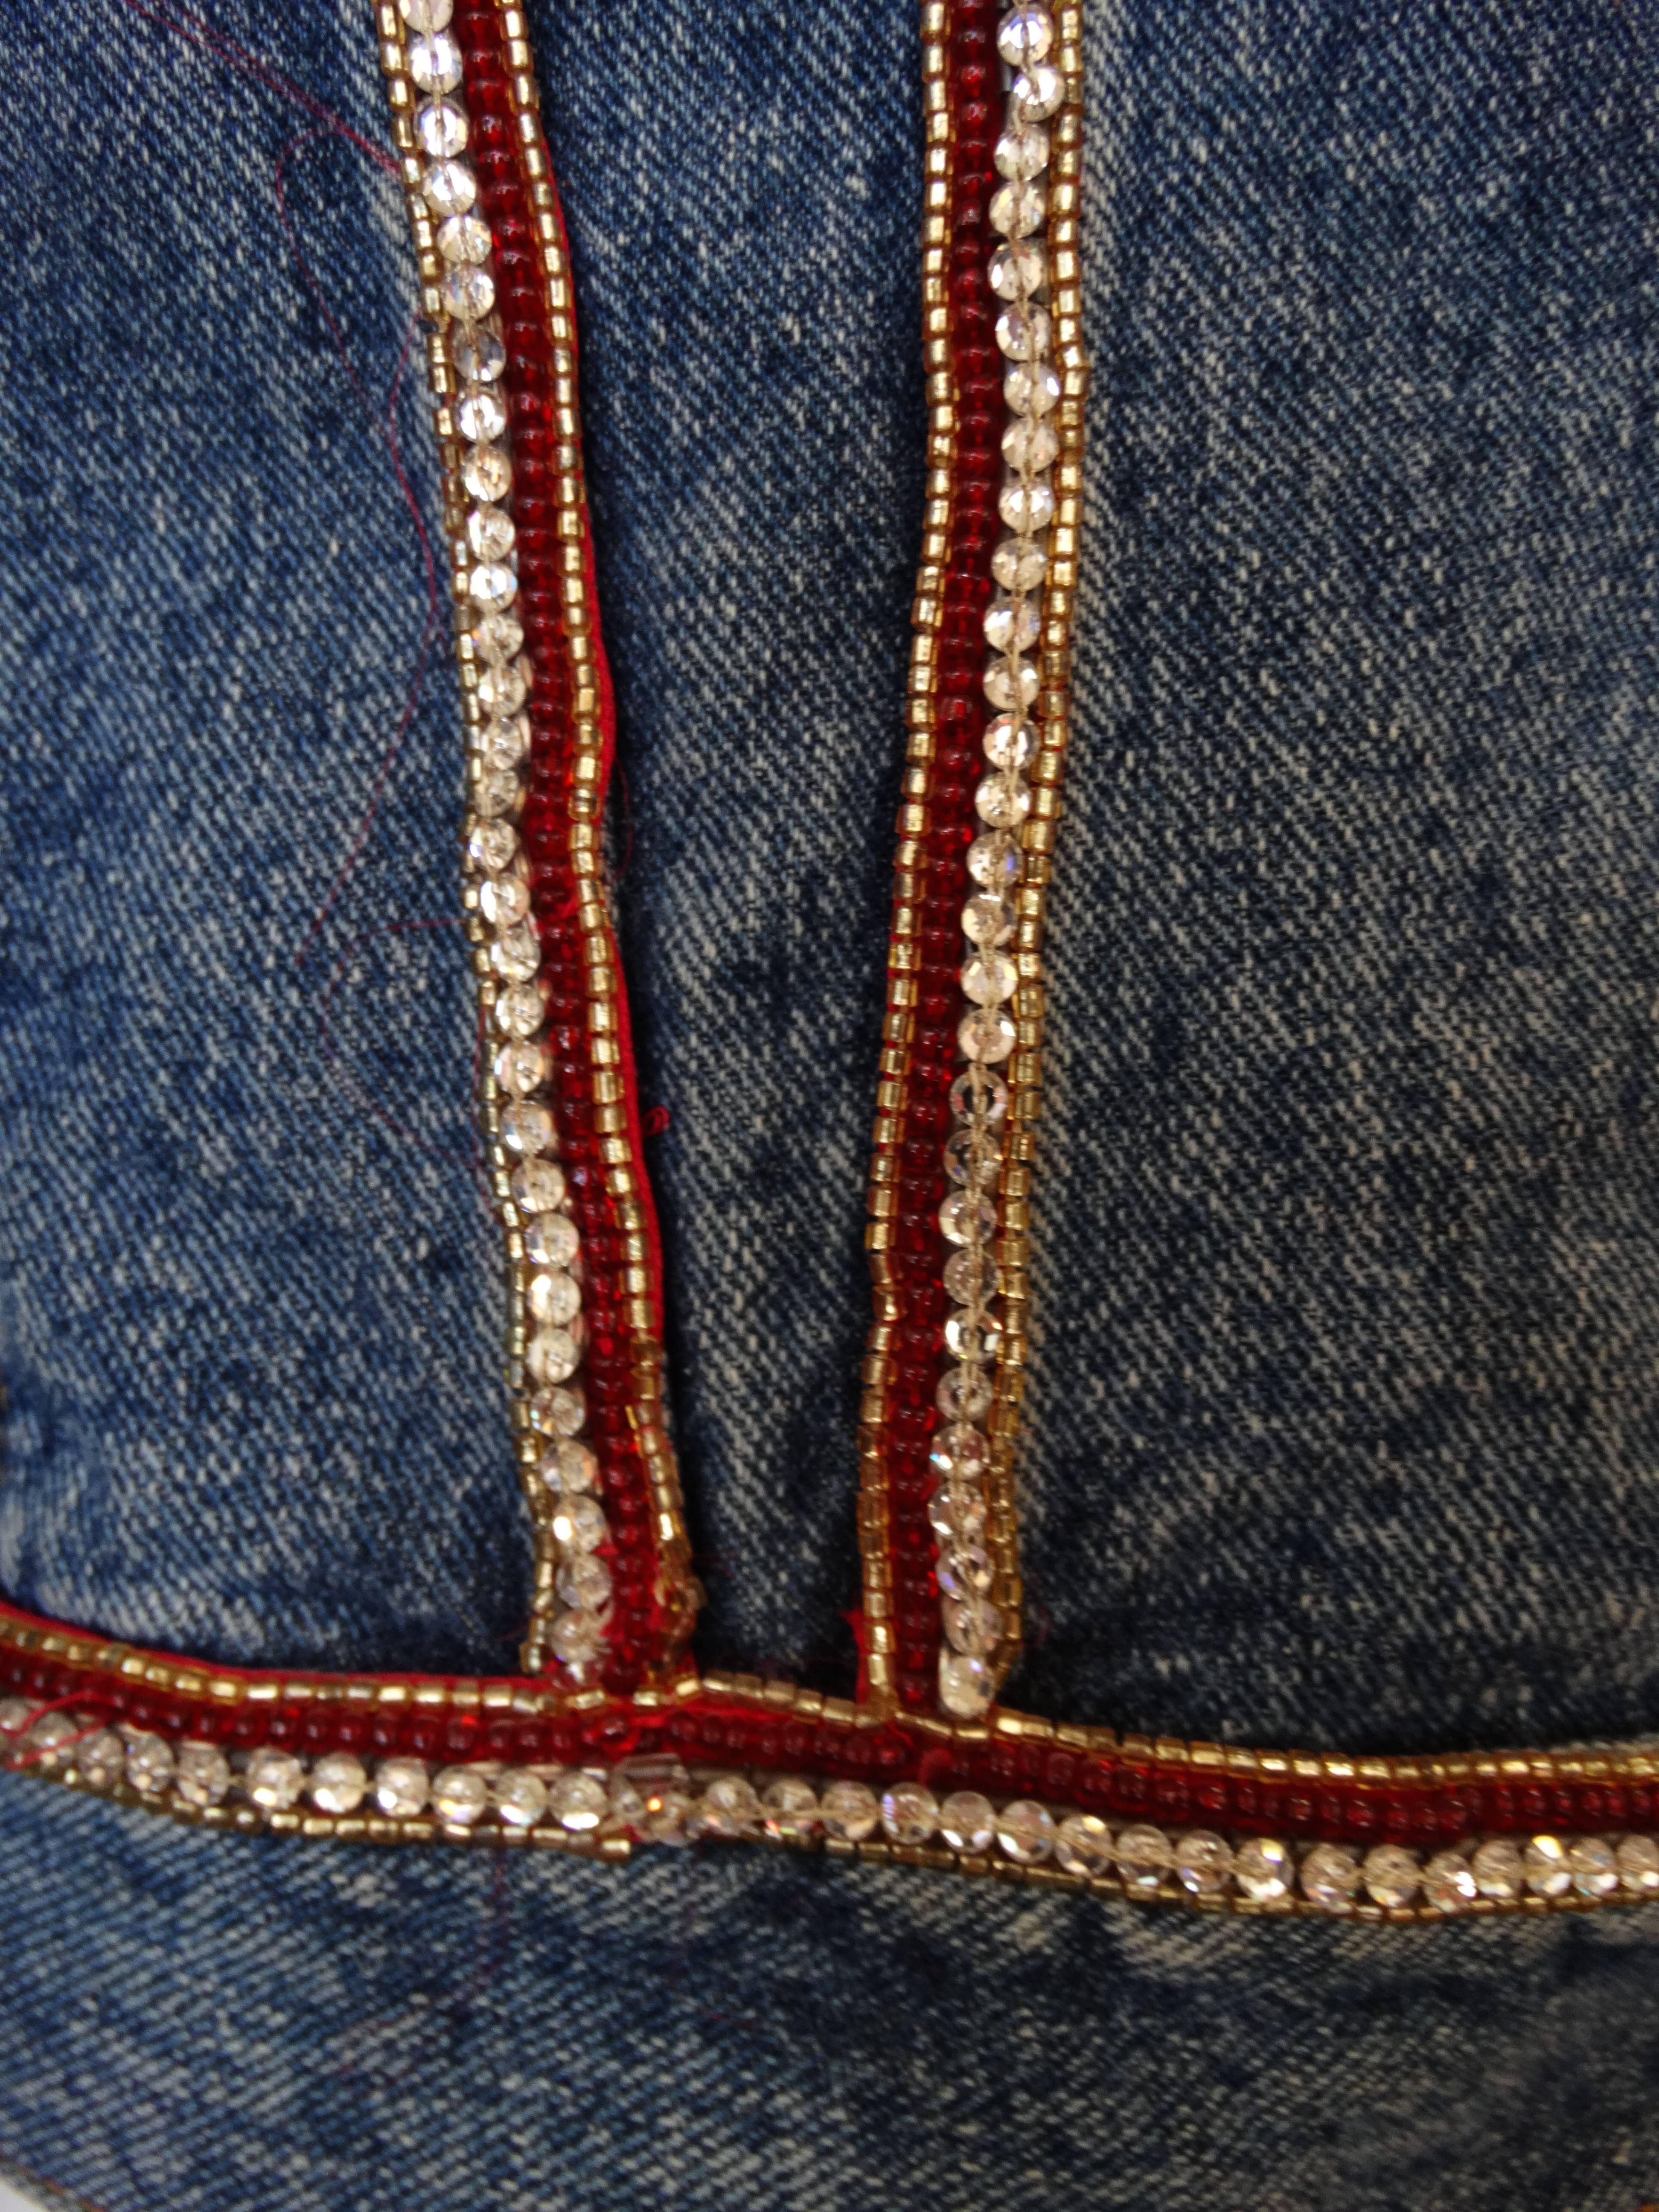 Super rare and never worn- Mary McFadden couture in collaboration with Levi's! Denim Levi's jacket in the perfect blue jean wash. Accented with red beading and crystalline rhinestones down the front and back seams. Cozy oversized classic 80s fit,